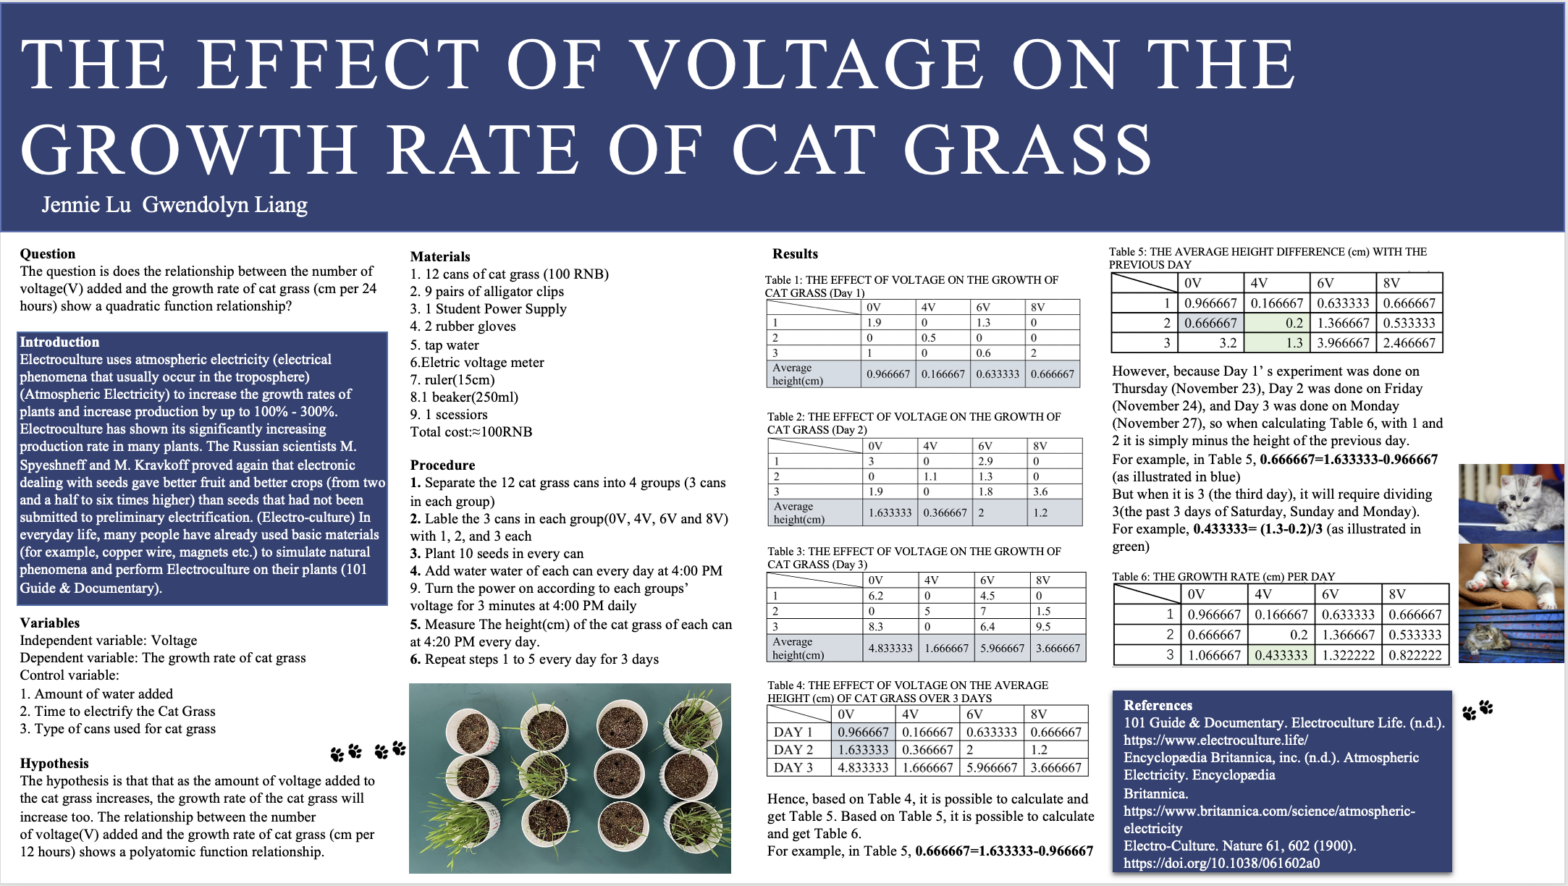 The Effect of Voltage on the Growth Rate of Cat Grass